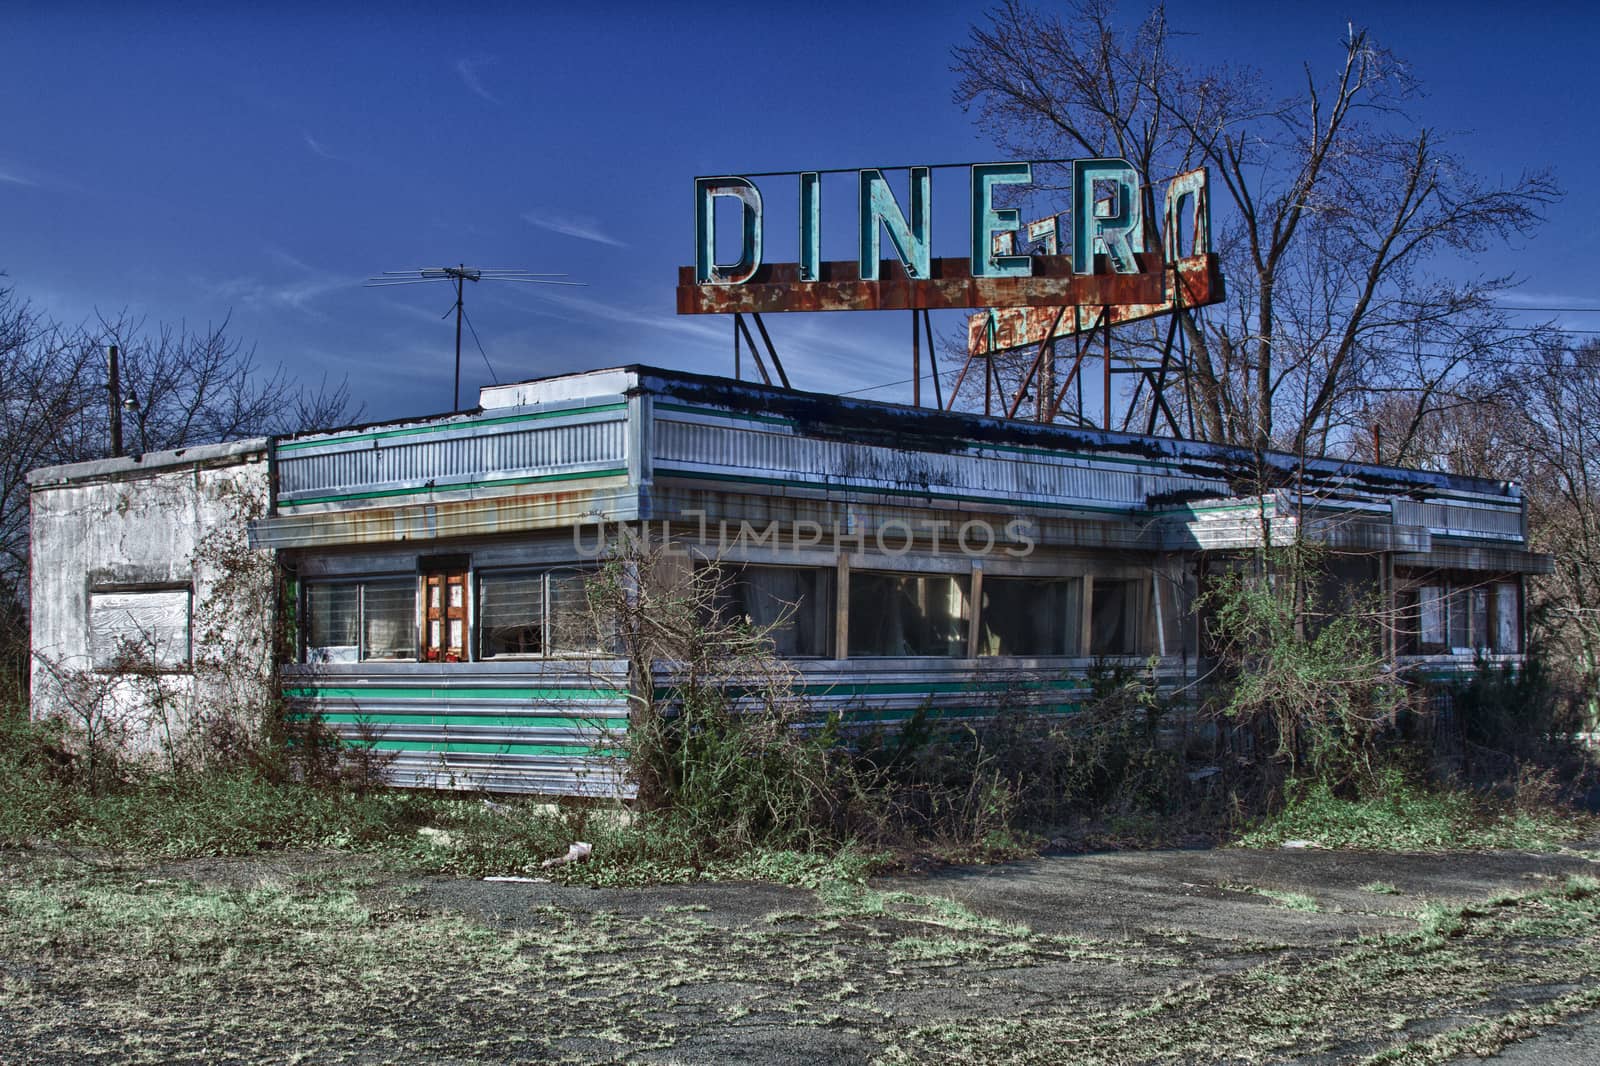 Abandoned diner in New Jersey